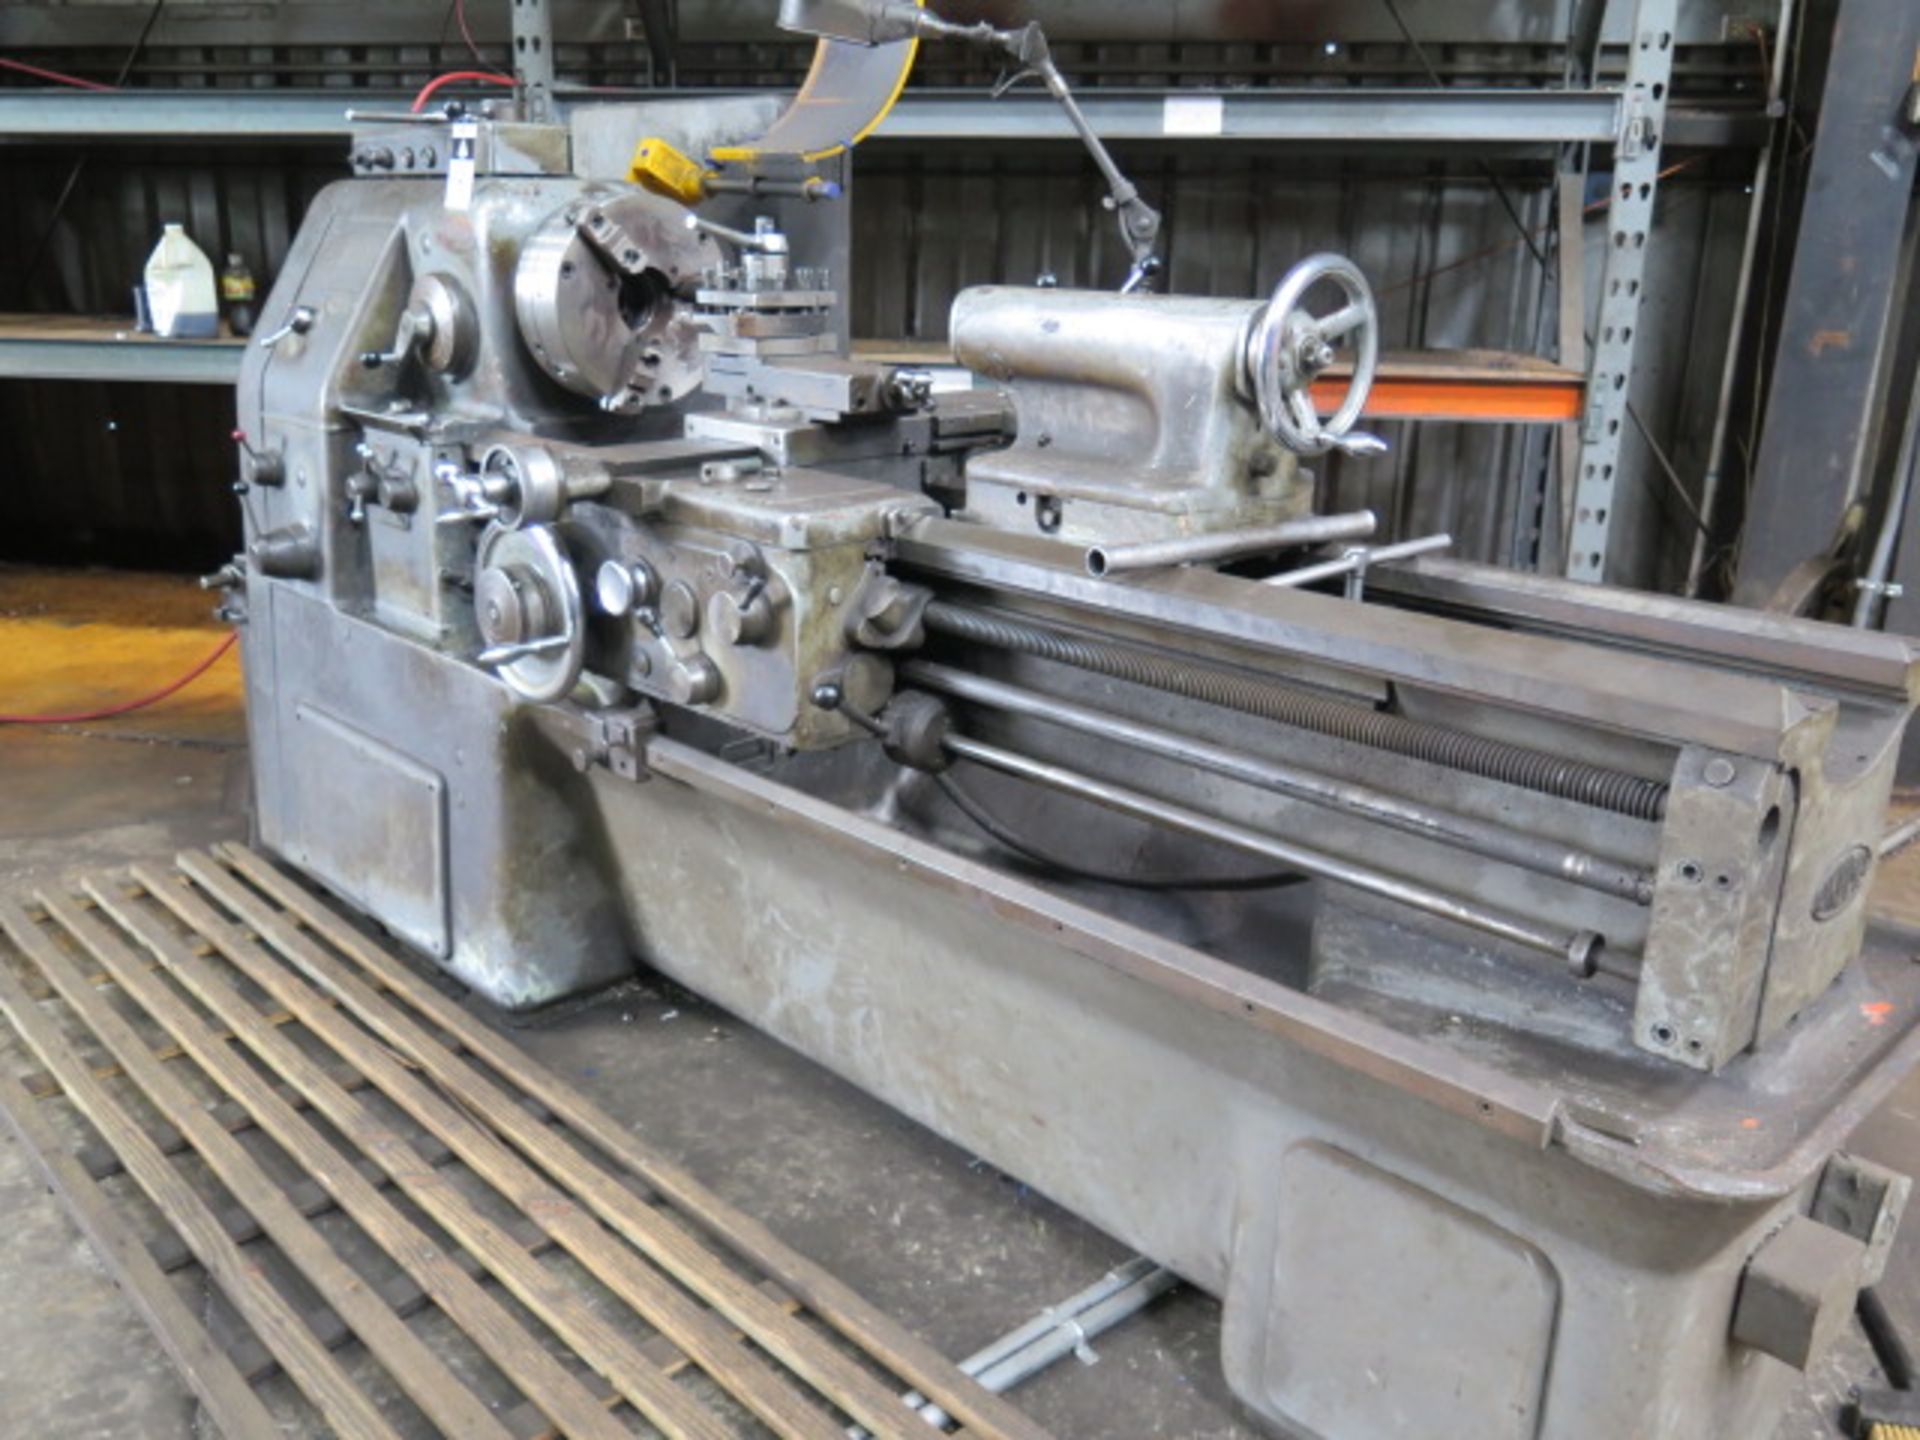 Okuma LS 18” x 54” Geared Head Gap Bed Lathe s/n 4112-10712 w/35-1800 RPM, Inch Threading,SOLD AS IS - Image 3 of 12